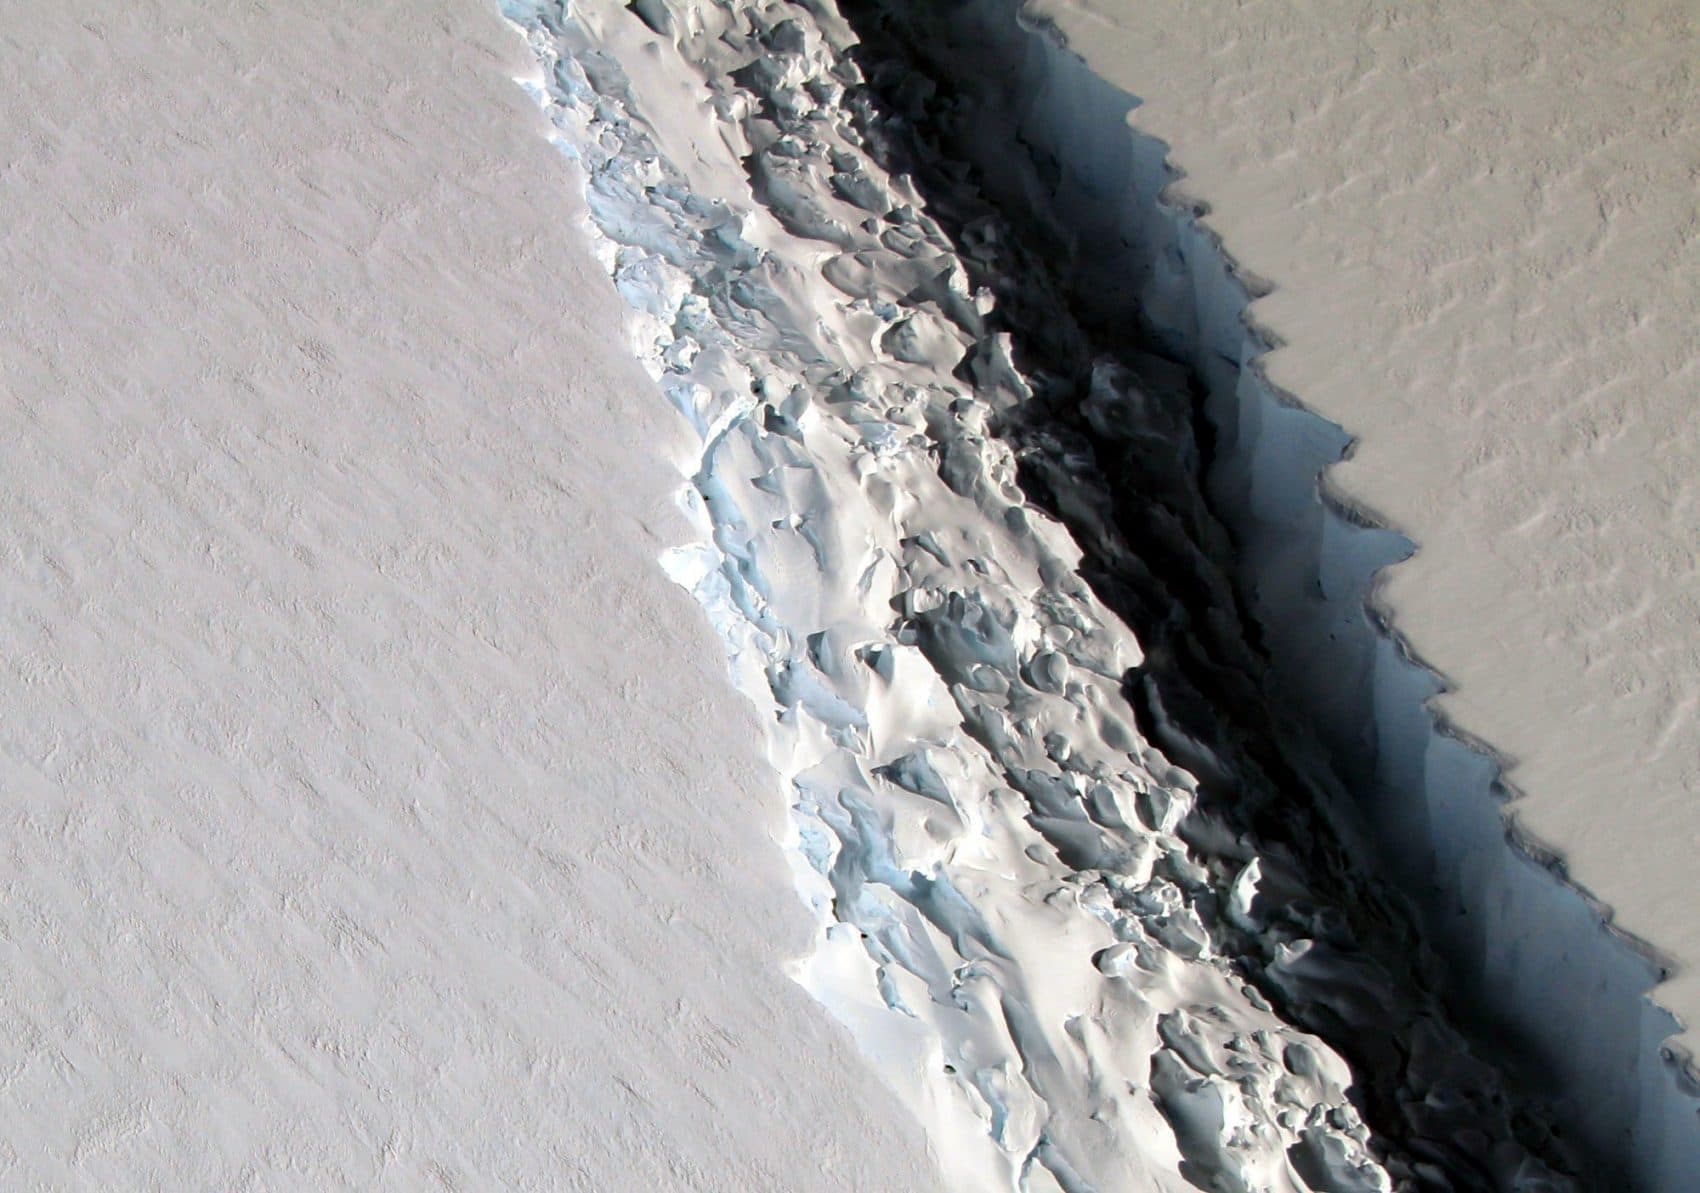 This Nov. 10, 2016 aerial photo released by NASA, shows a rift in the Antarctic Peninsula's Larsen C ice shelf. According to NASA, IceBridge scientists measured the Larsen C fracture to be about 70 miles long, more than 300 feet wide and about a third of a mile deep. (John Sonntag/NASA via AP)